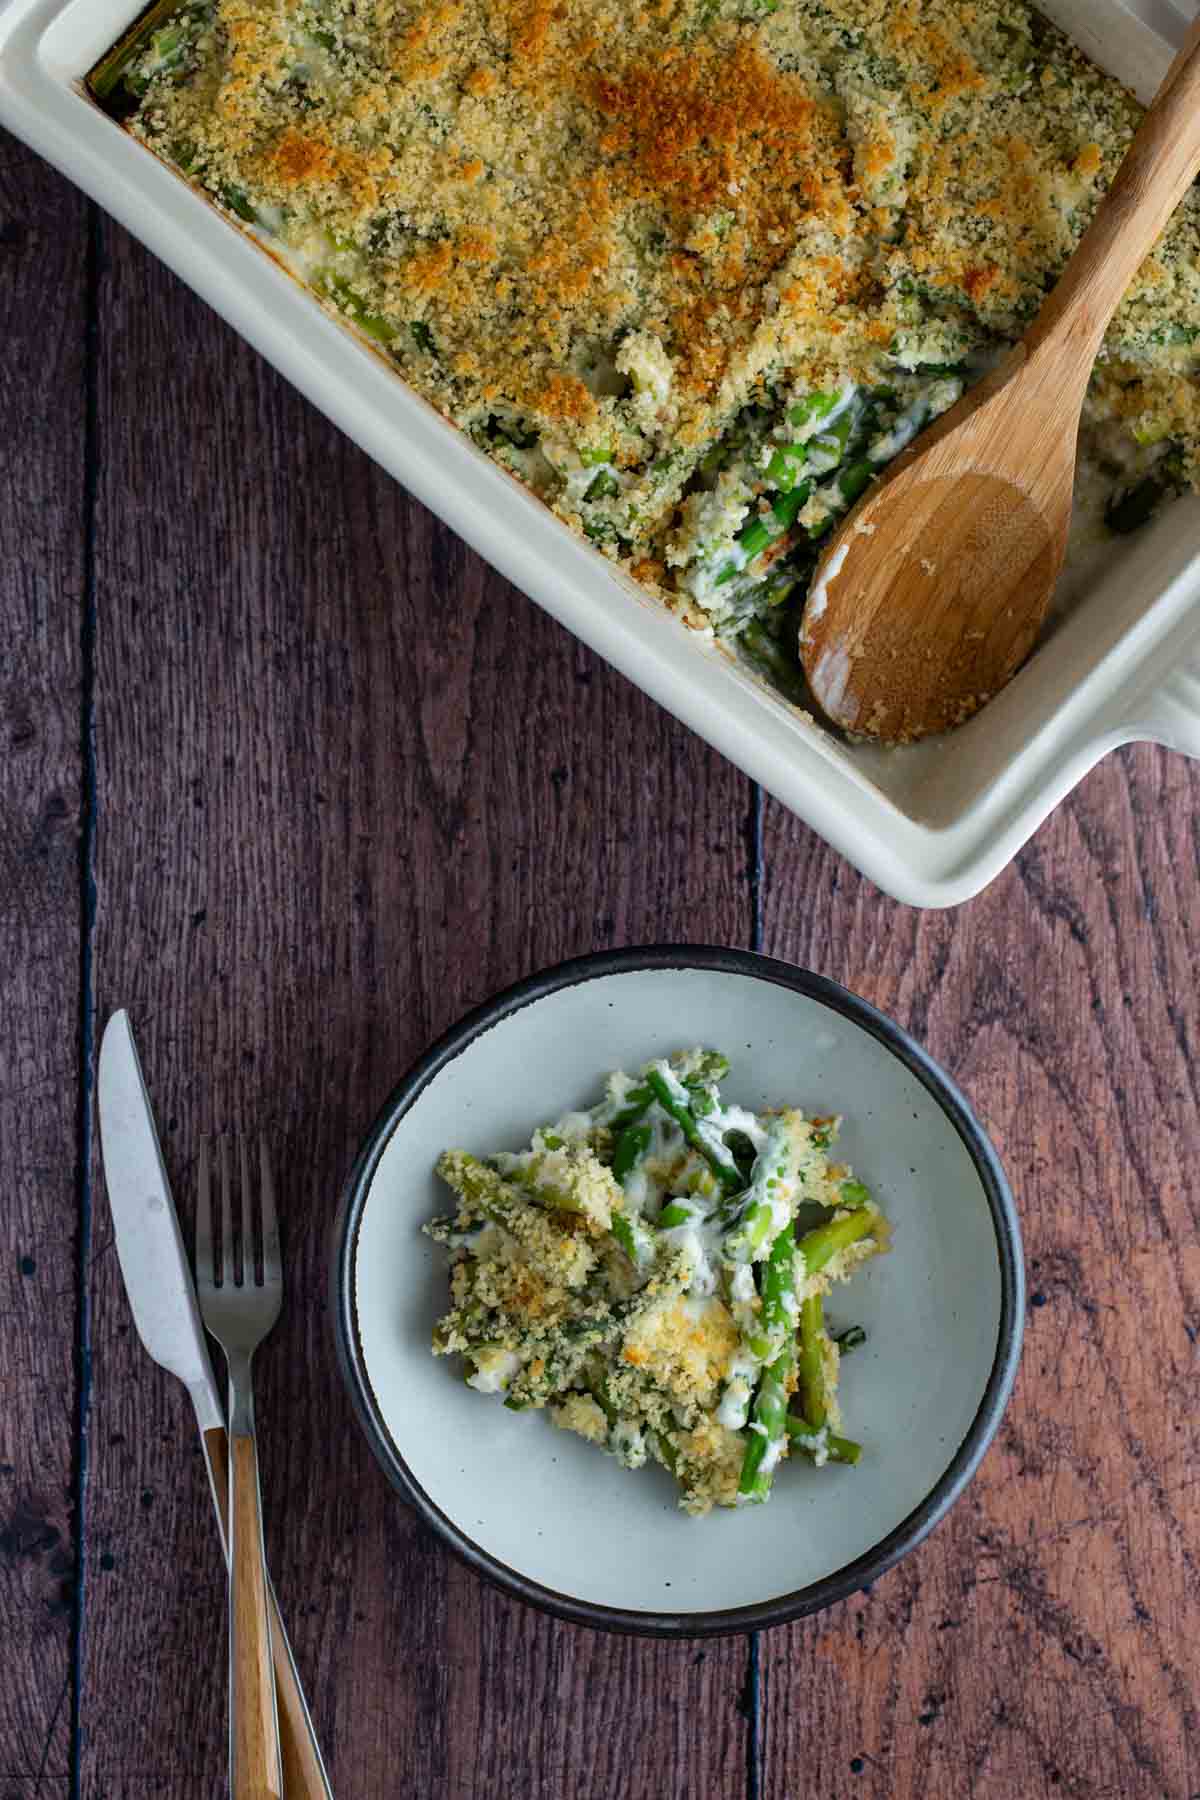 A serving of asparagus casserole topped with breadcrumbs in a ceramic dish with a wooden spoon, alongside a plated portion with a fork.